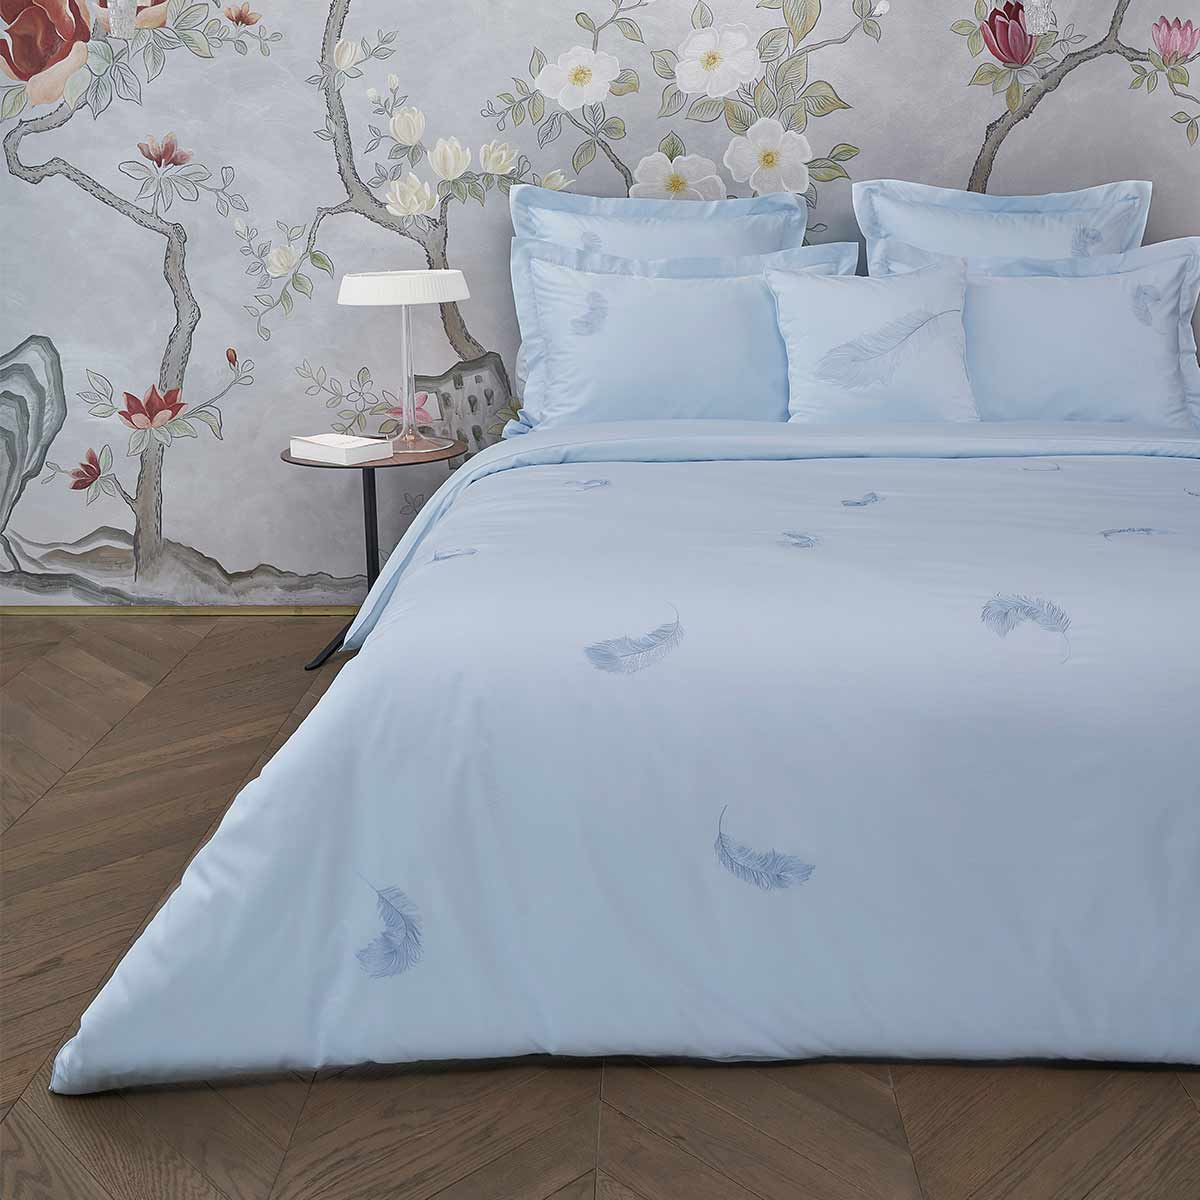 feather duvet cover aq